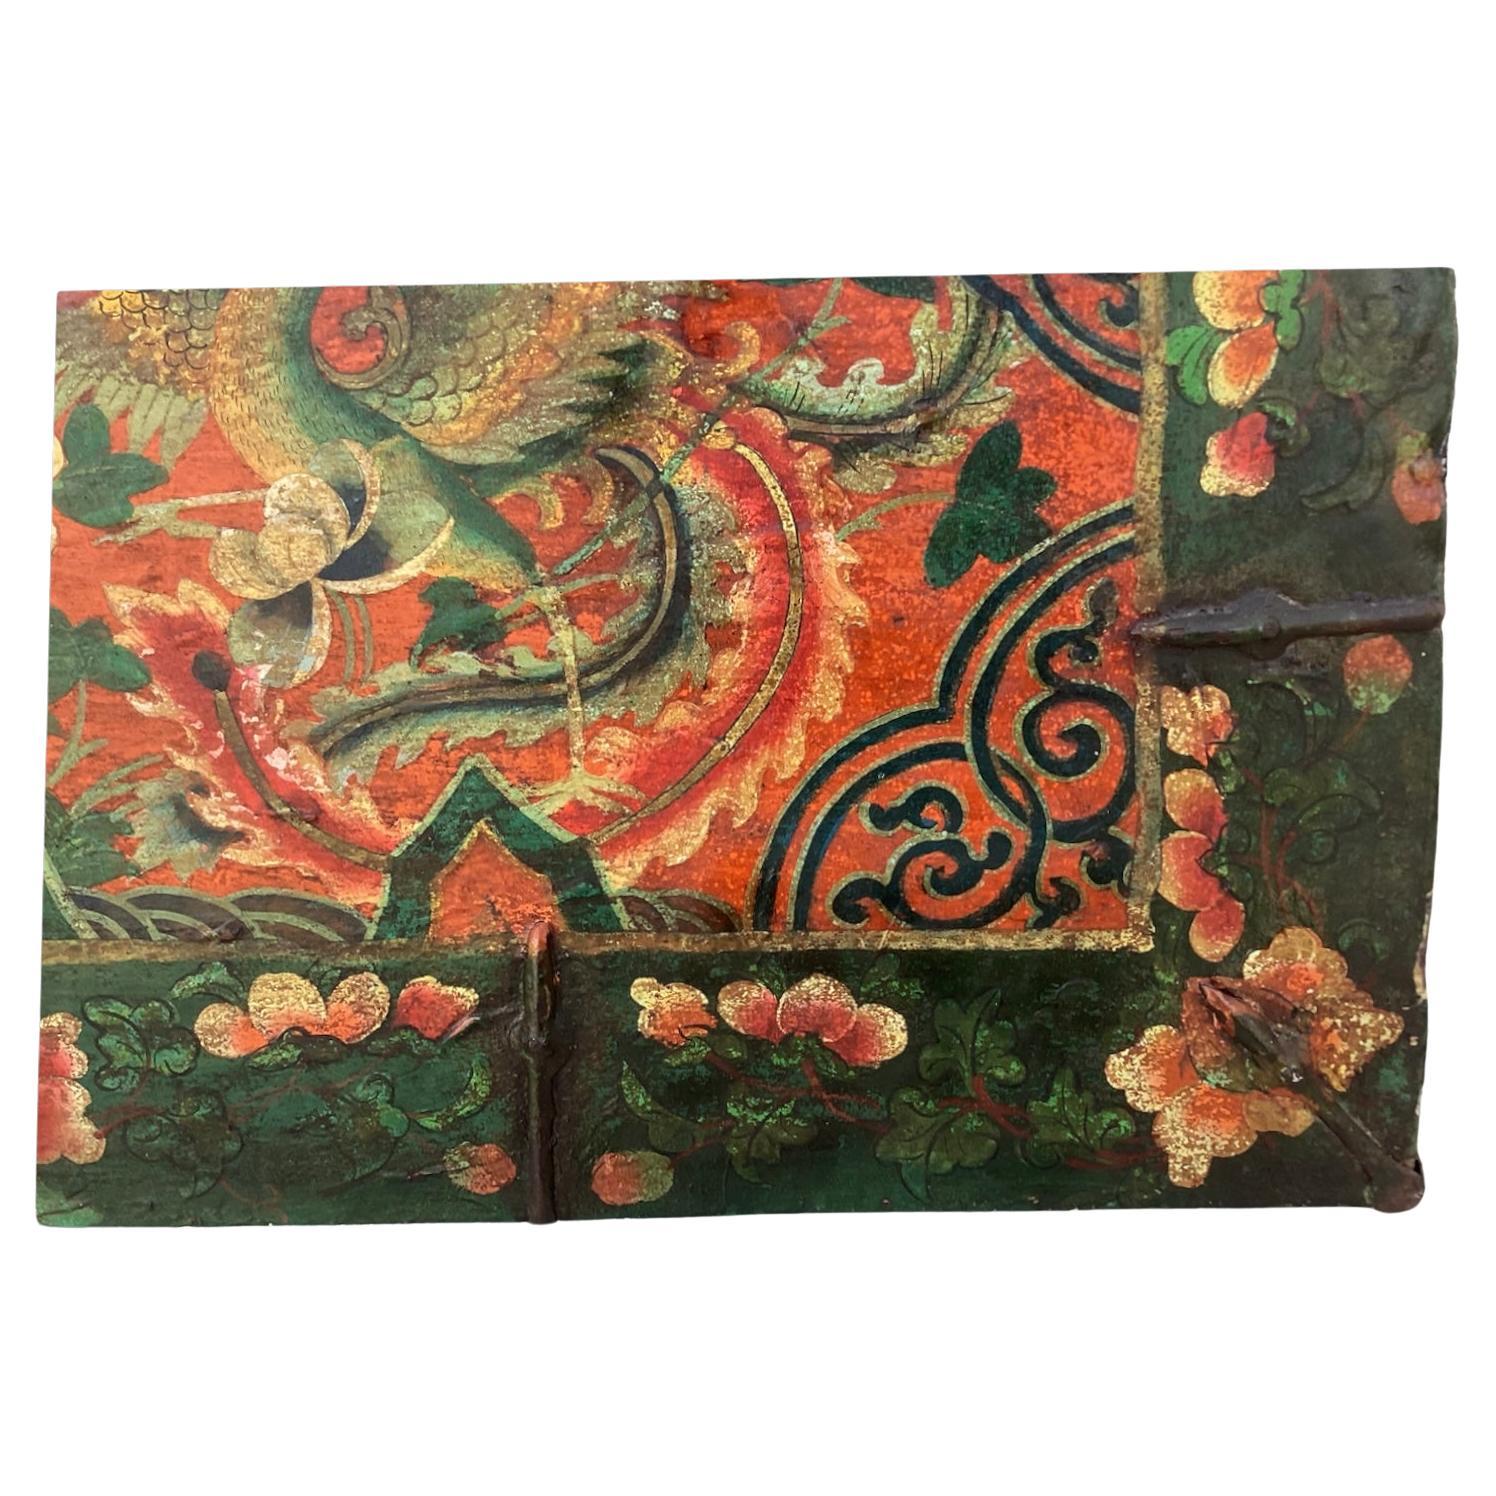 AntiqueTibetan chest, beautifully aged painted leather with original iron hardware. Chest has a spacious wooden interior, offering a large amount of storage. Outside features polychrome painted dragons and Asian flowers in red, green and yellow